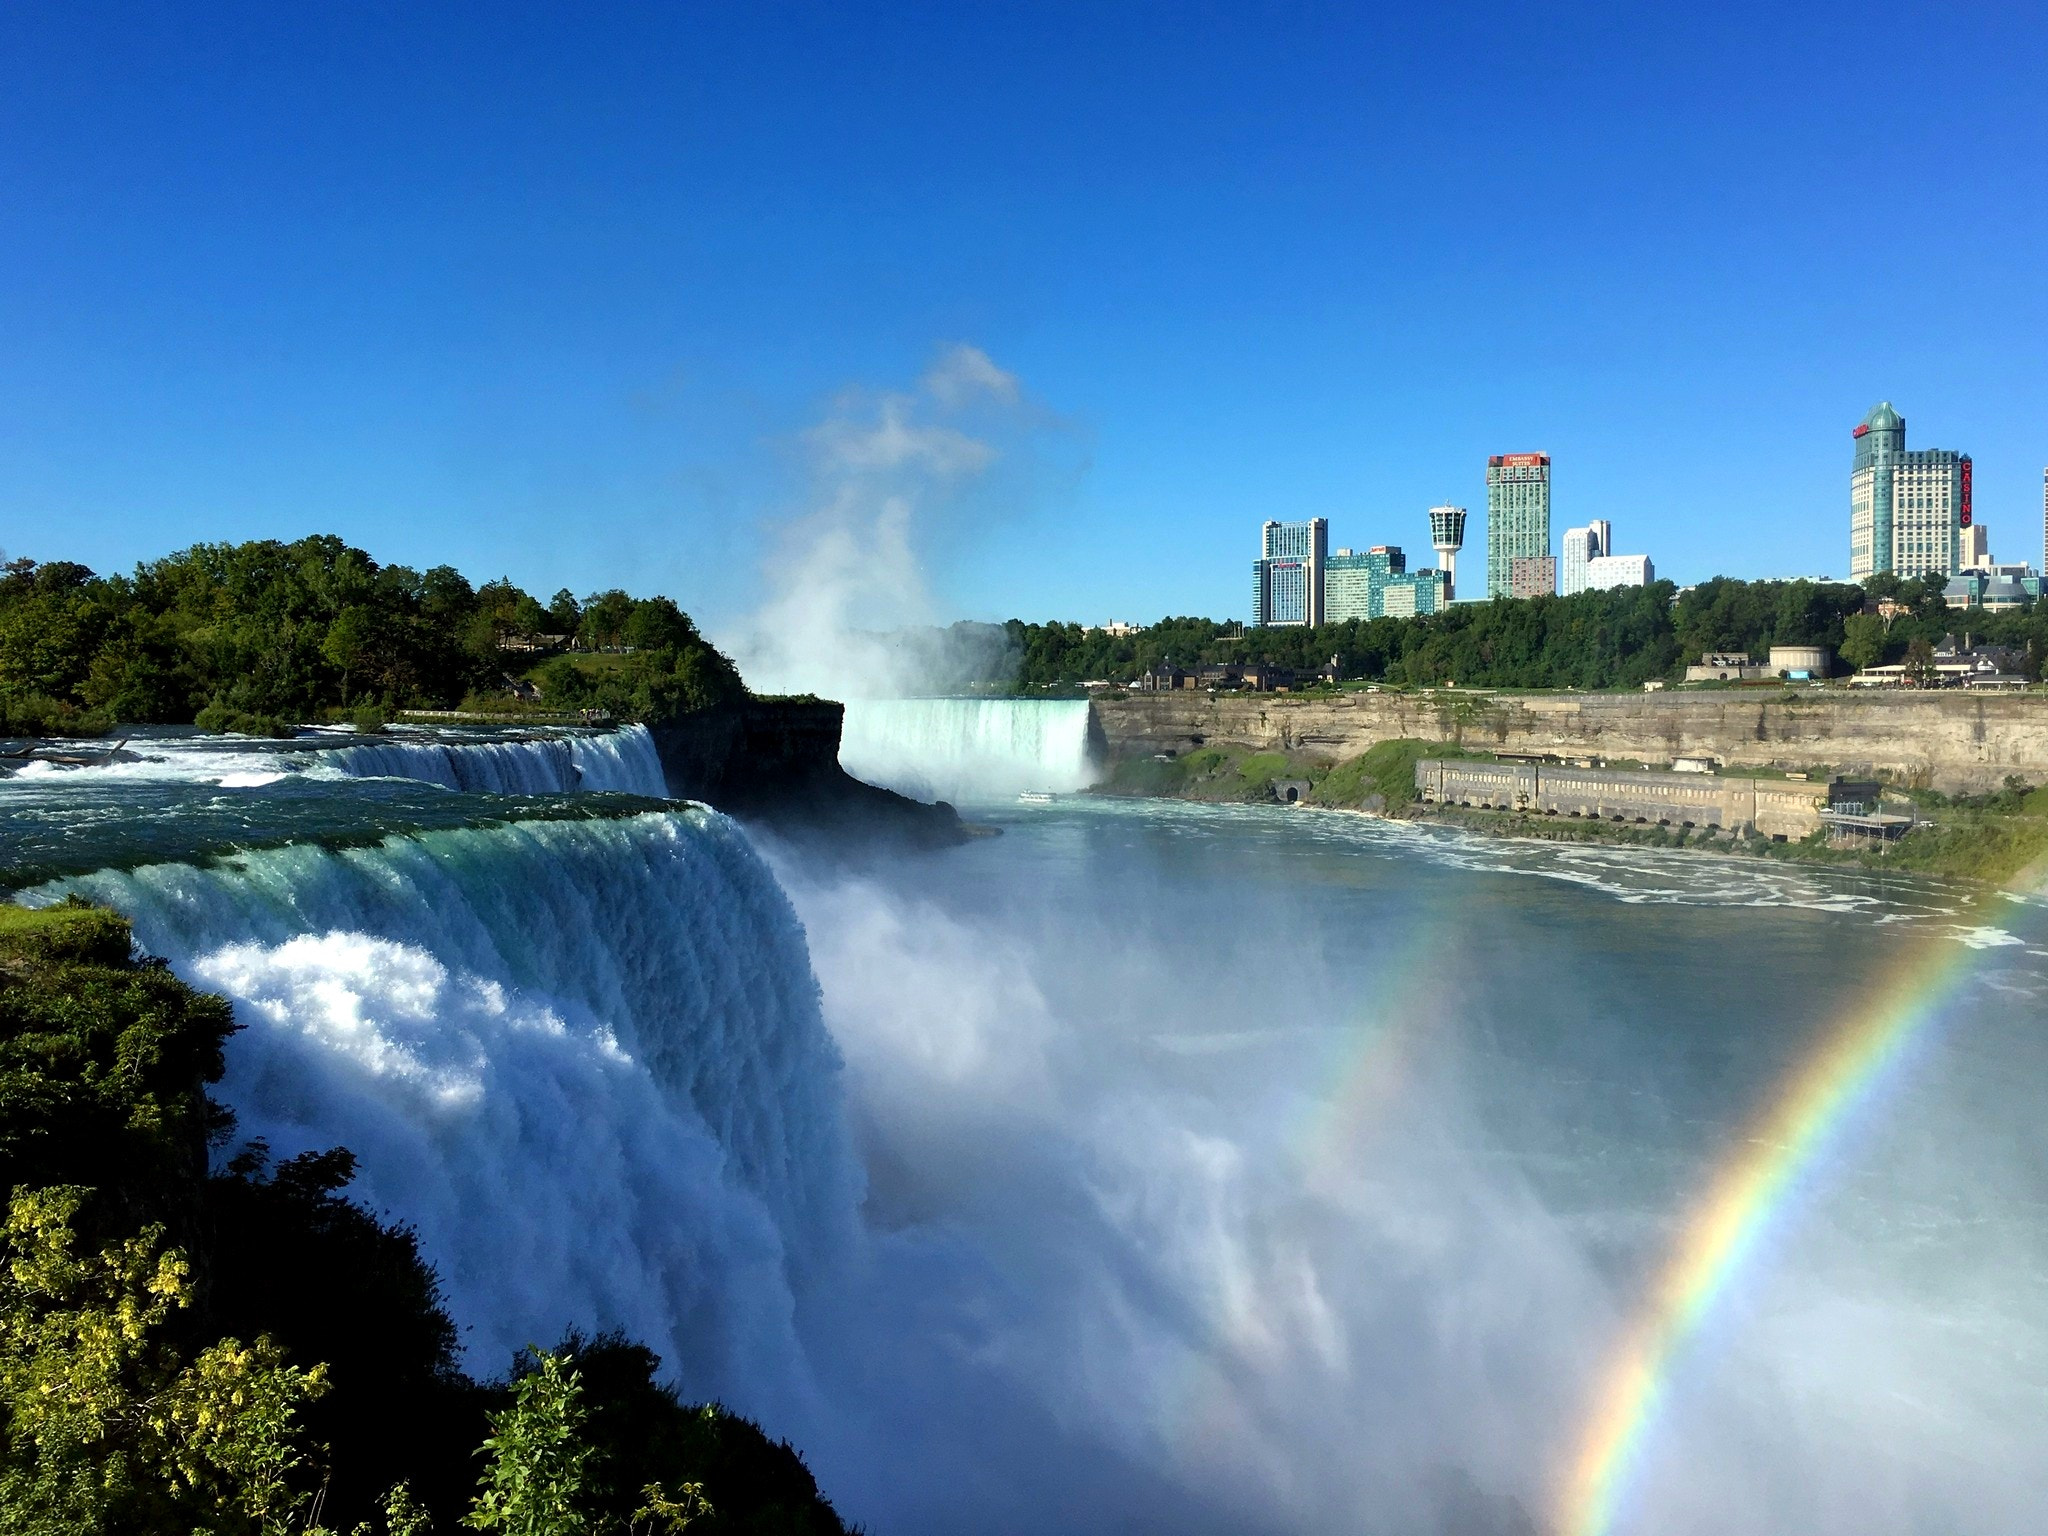 Jag.gr 645 PRO Mk III for Apple iPhone 6s sample photo. American falls with rainbow photography